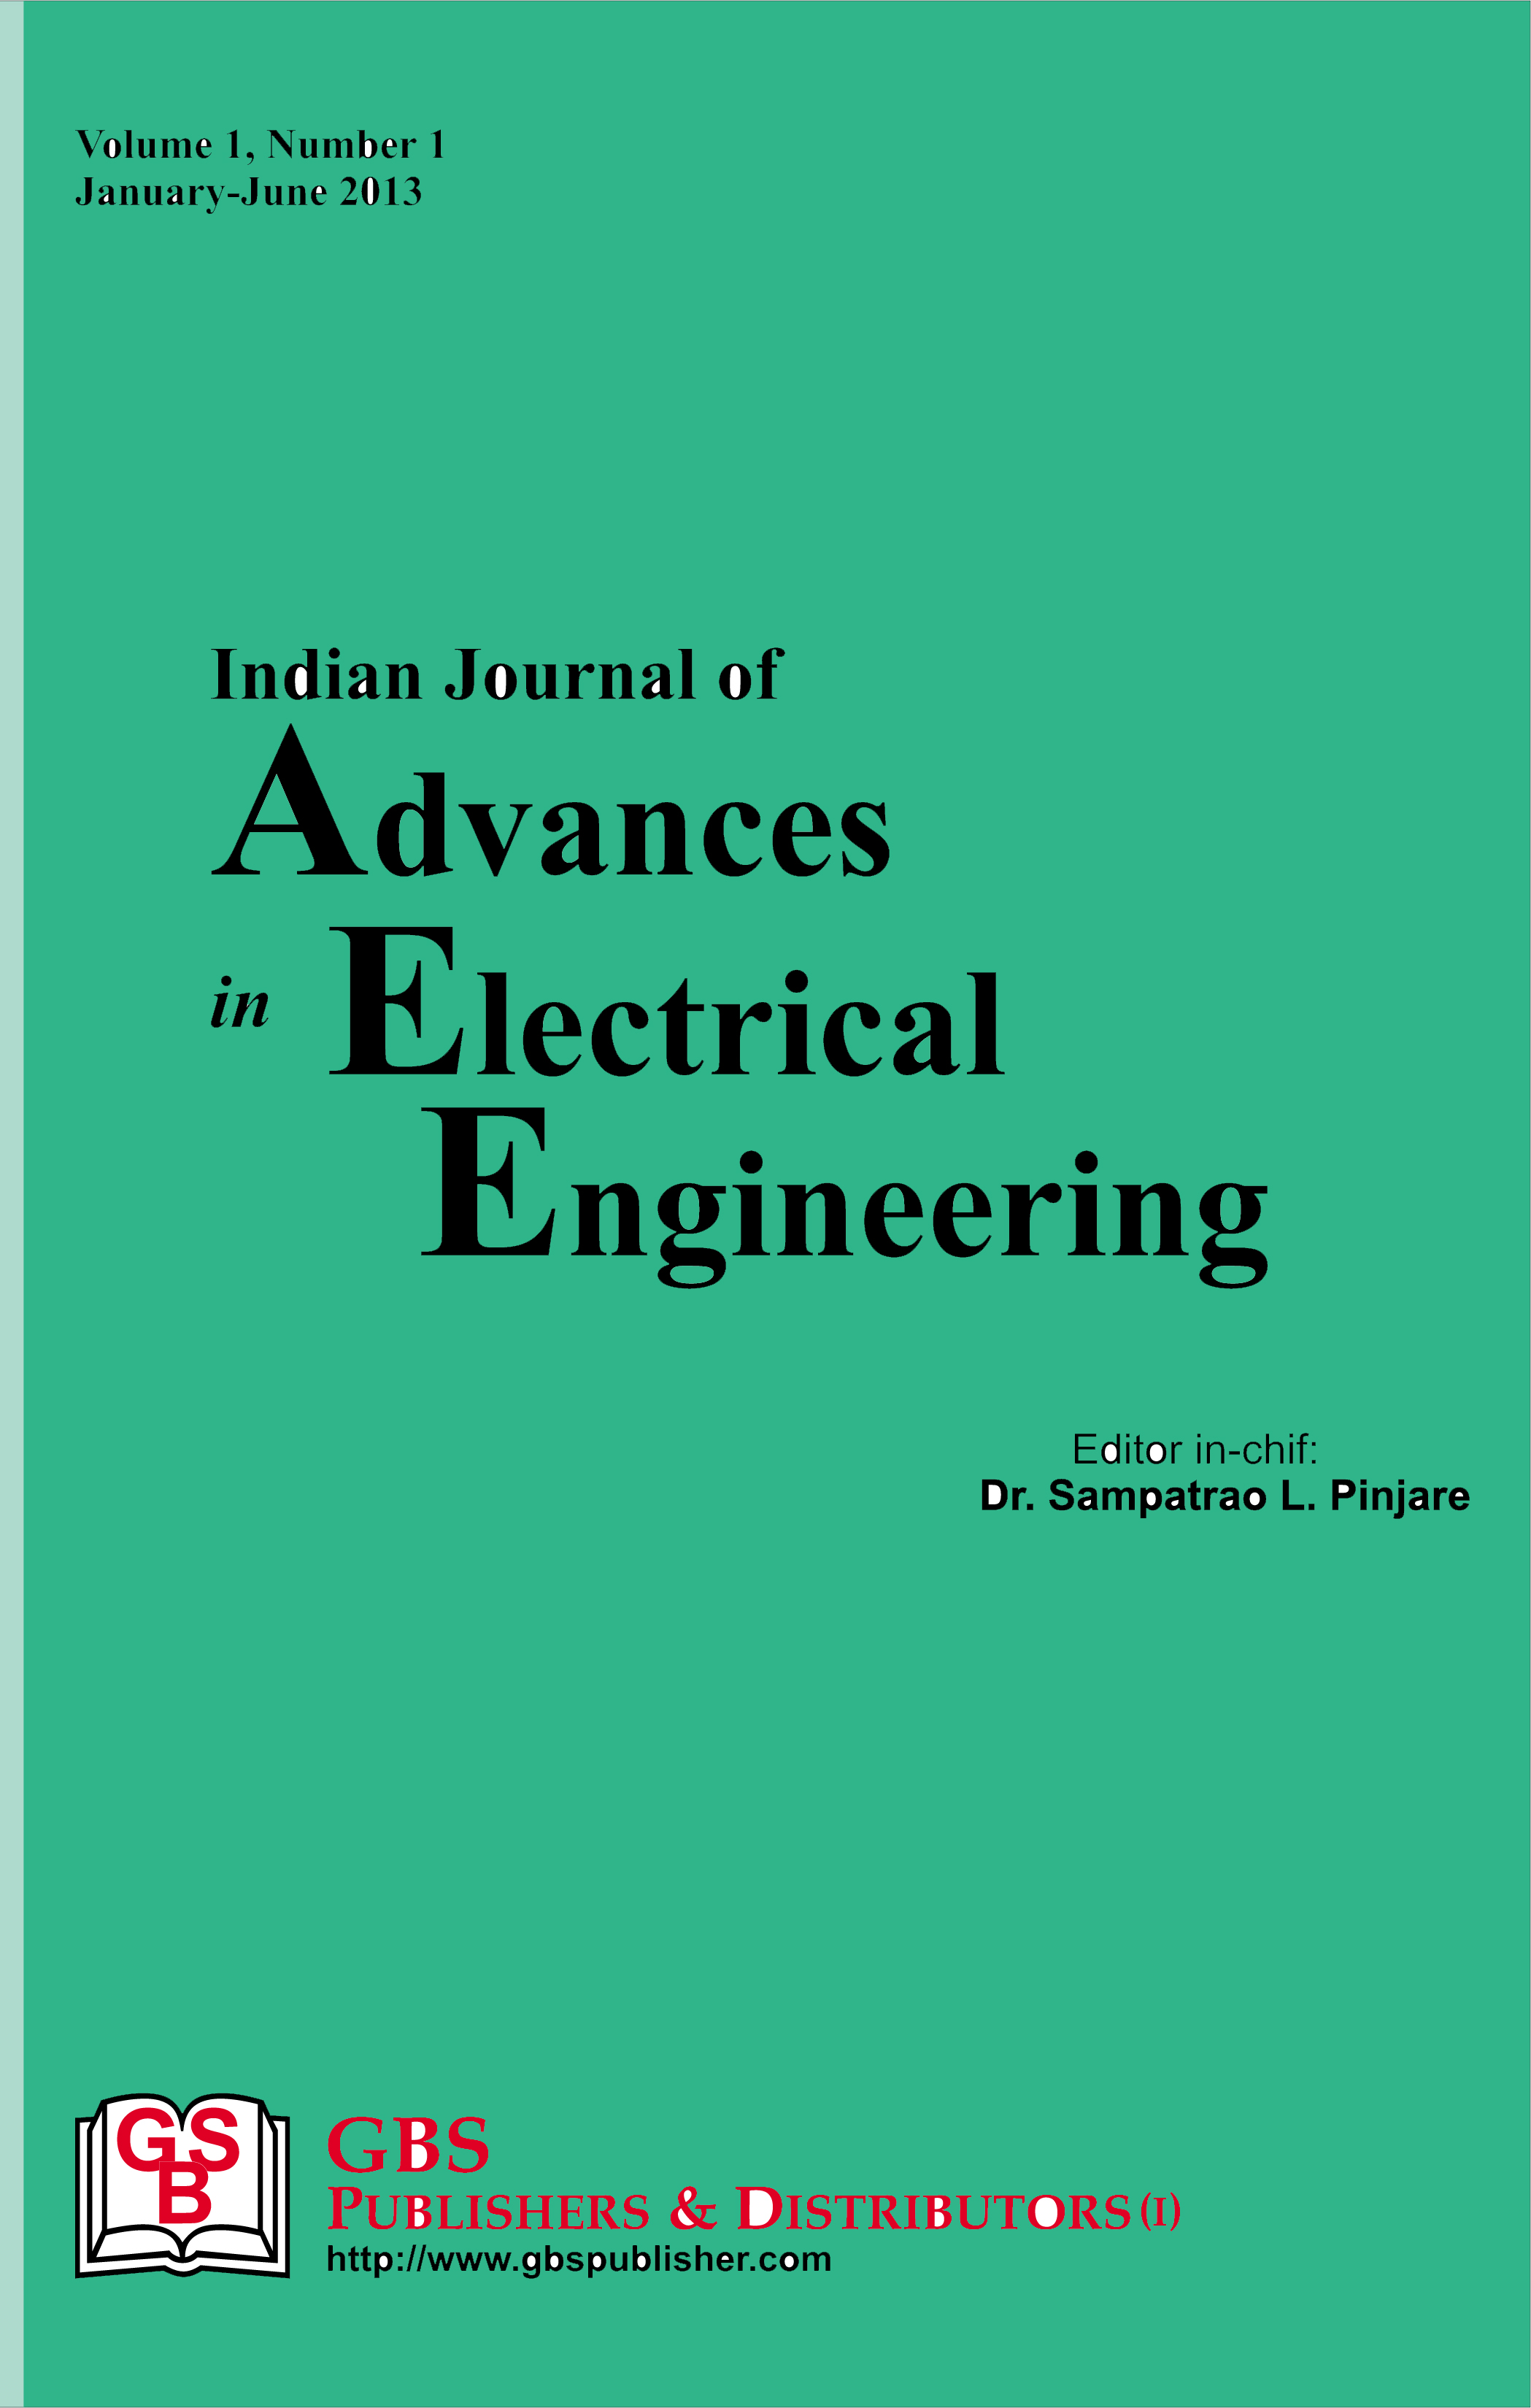 Indian Journal of Advances in Electrical Engineering